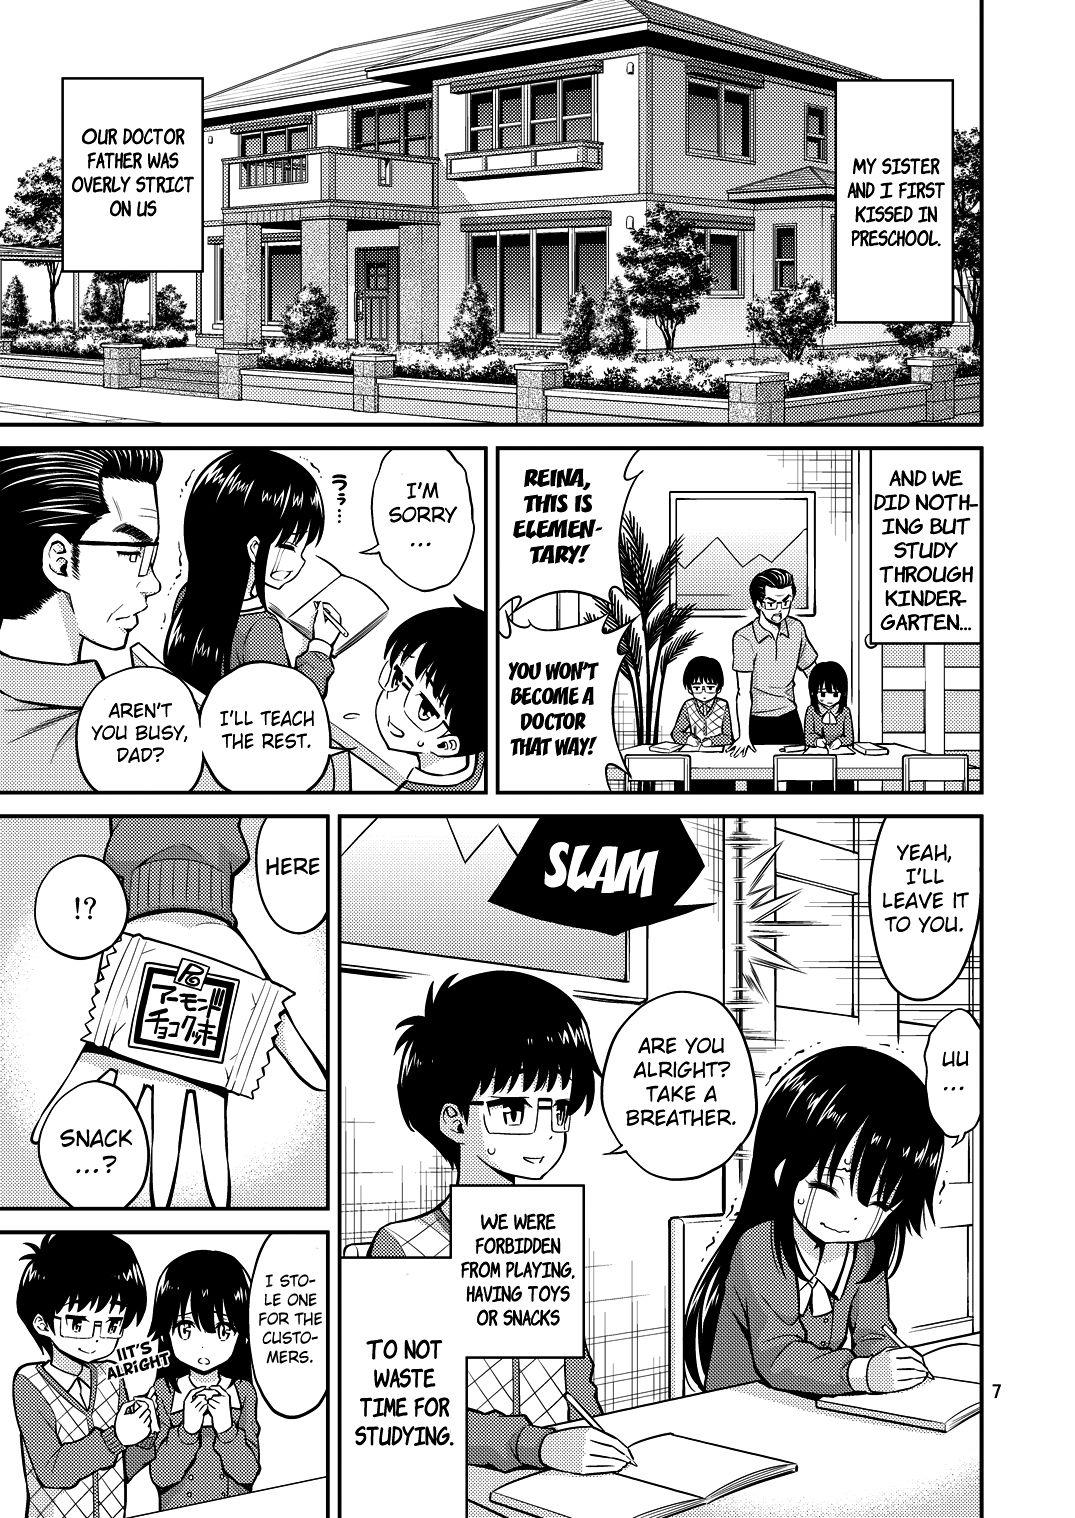 Snatch Imouto to Uchi Kiss | Kissing in the House with Little Sister - Original Chinese - Page 7